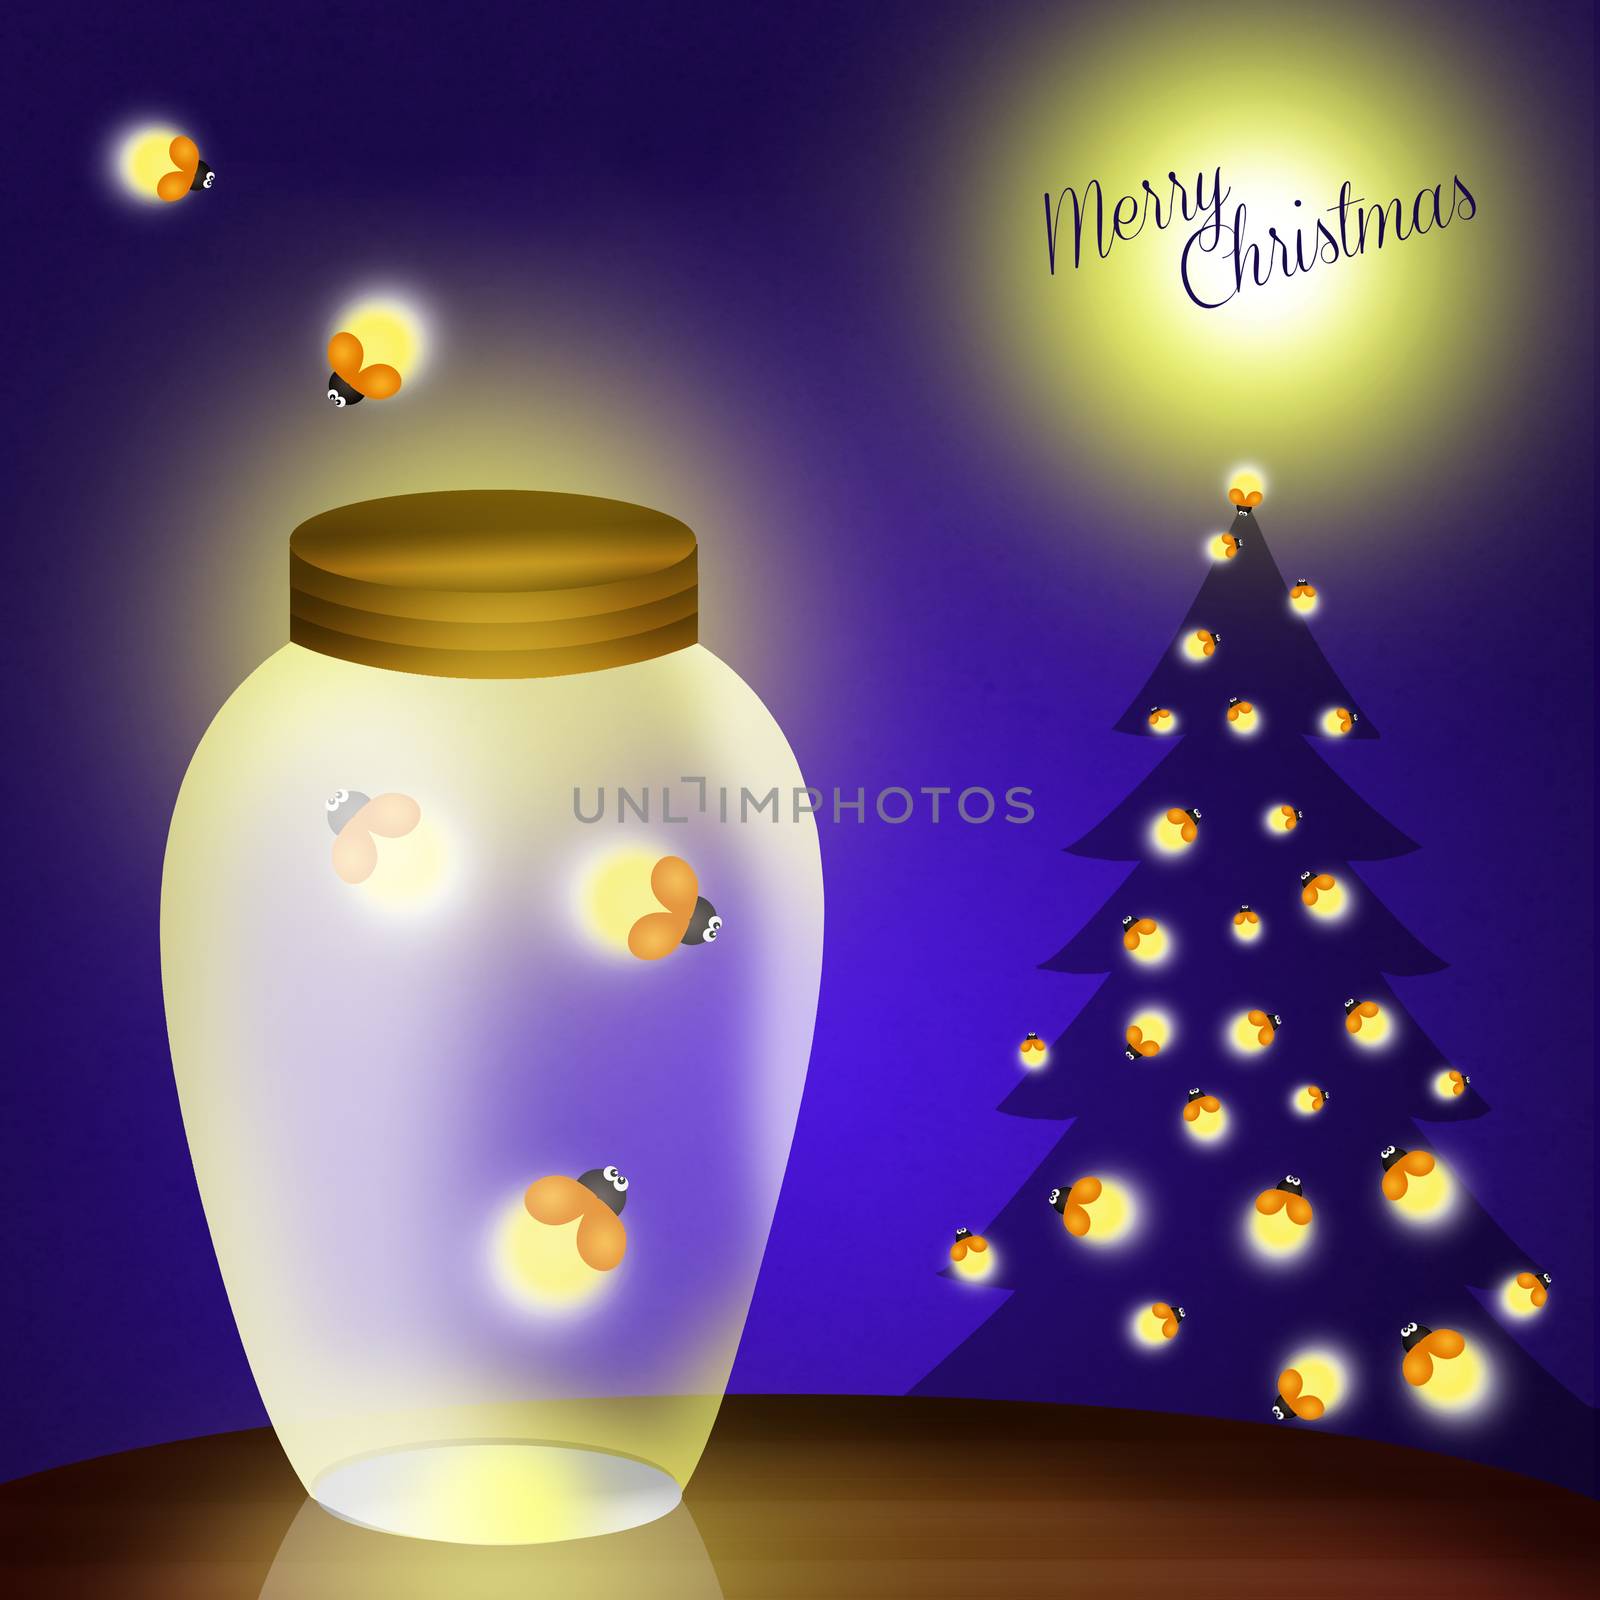 fireflies in the jar at Christmas